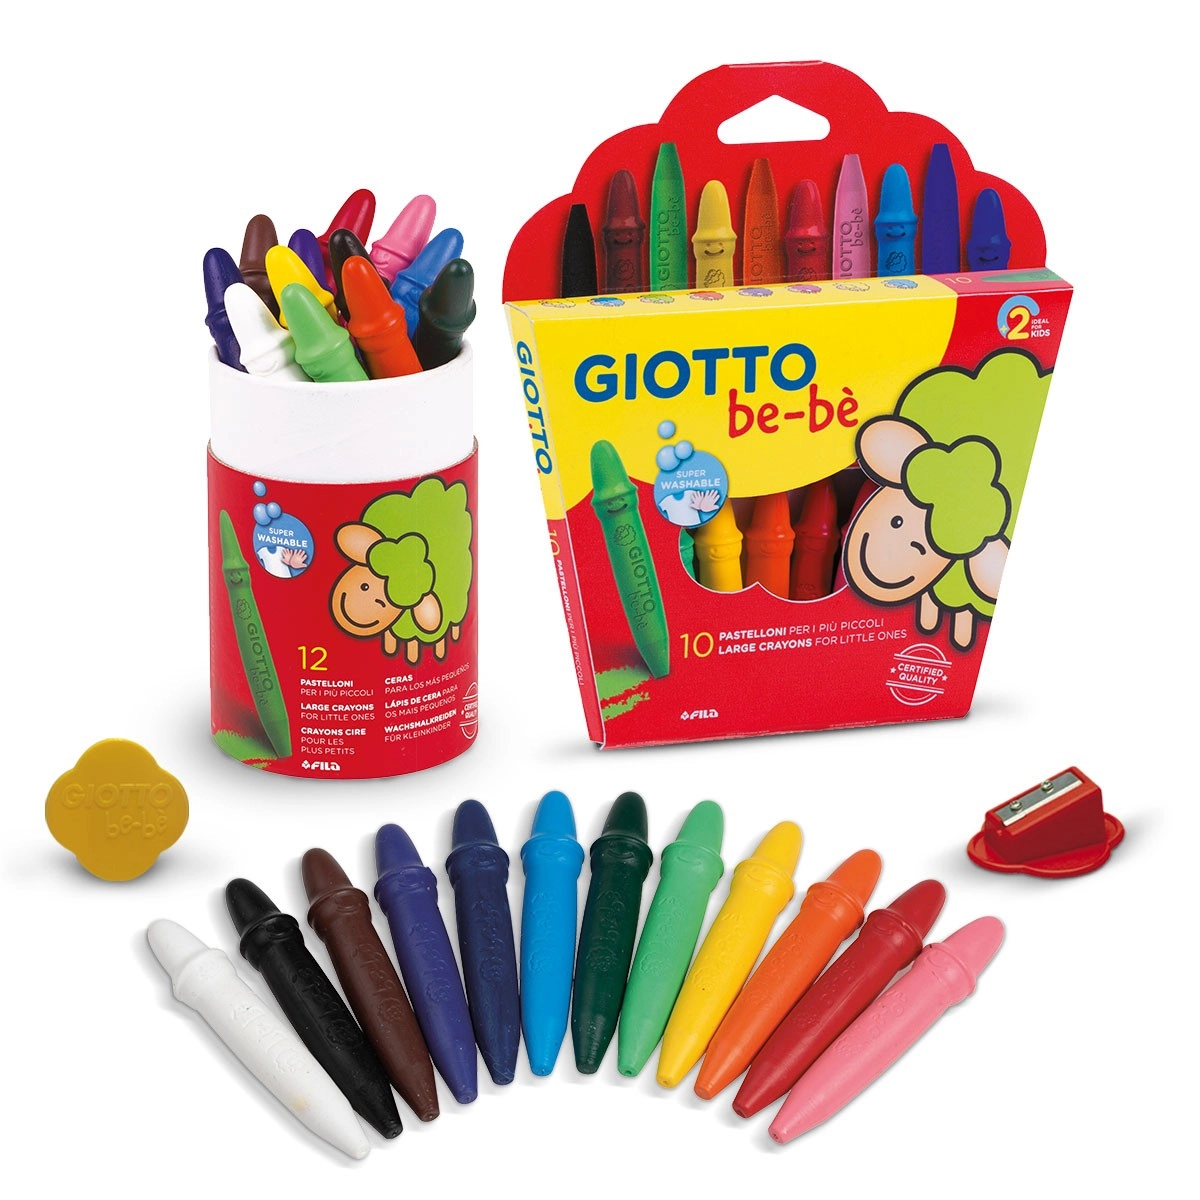 Giotto be-bè Large Wax Crayons, 10 Assorted Colours, Super-Washable, Ideal  for Children and Schools